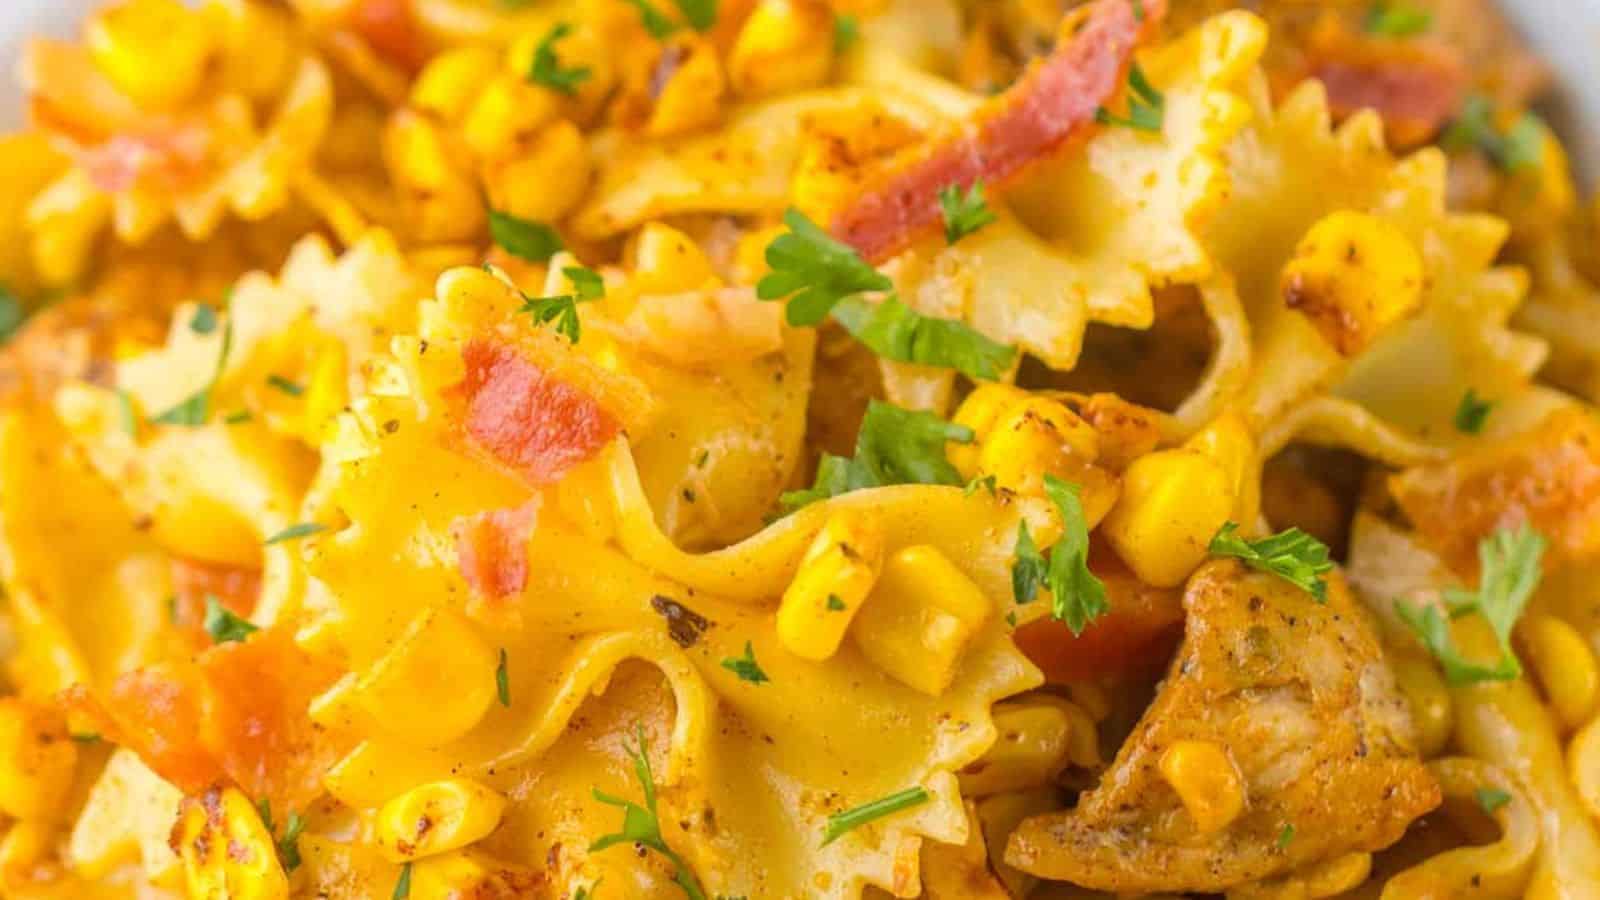 <p>Creamy Chicken and Corn Pasta is the crowd-pleaser you didn't know you needed. Sweet corn and chicken make for a delicious duo. The creamy sauce wraps every pasta piece in deliciousness. On nights when comfort food is in order, this dish delivers big time.<br><strong>Get the Recipe: </strong><a href="https://www.pocketfriendlyrecipes.com/chicken-and-corn-pasta/?utm_source=msn&utm_medium=page&utm_campaign=msn">Creamy Chicken and Corn Pasta</a></p>